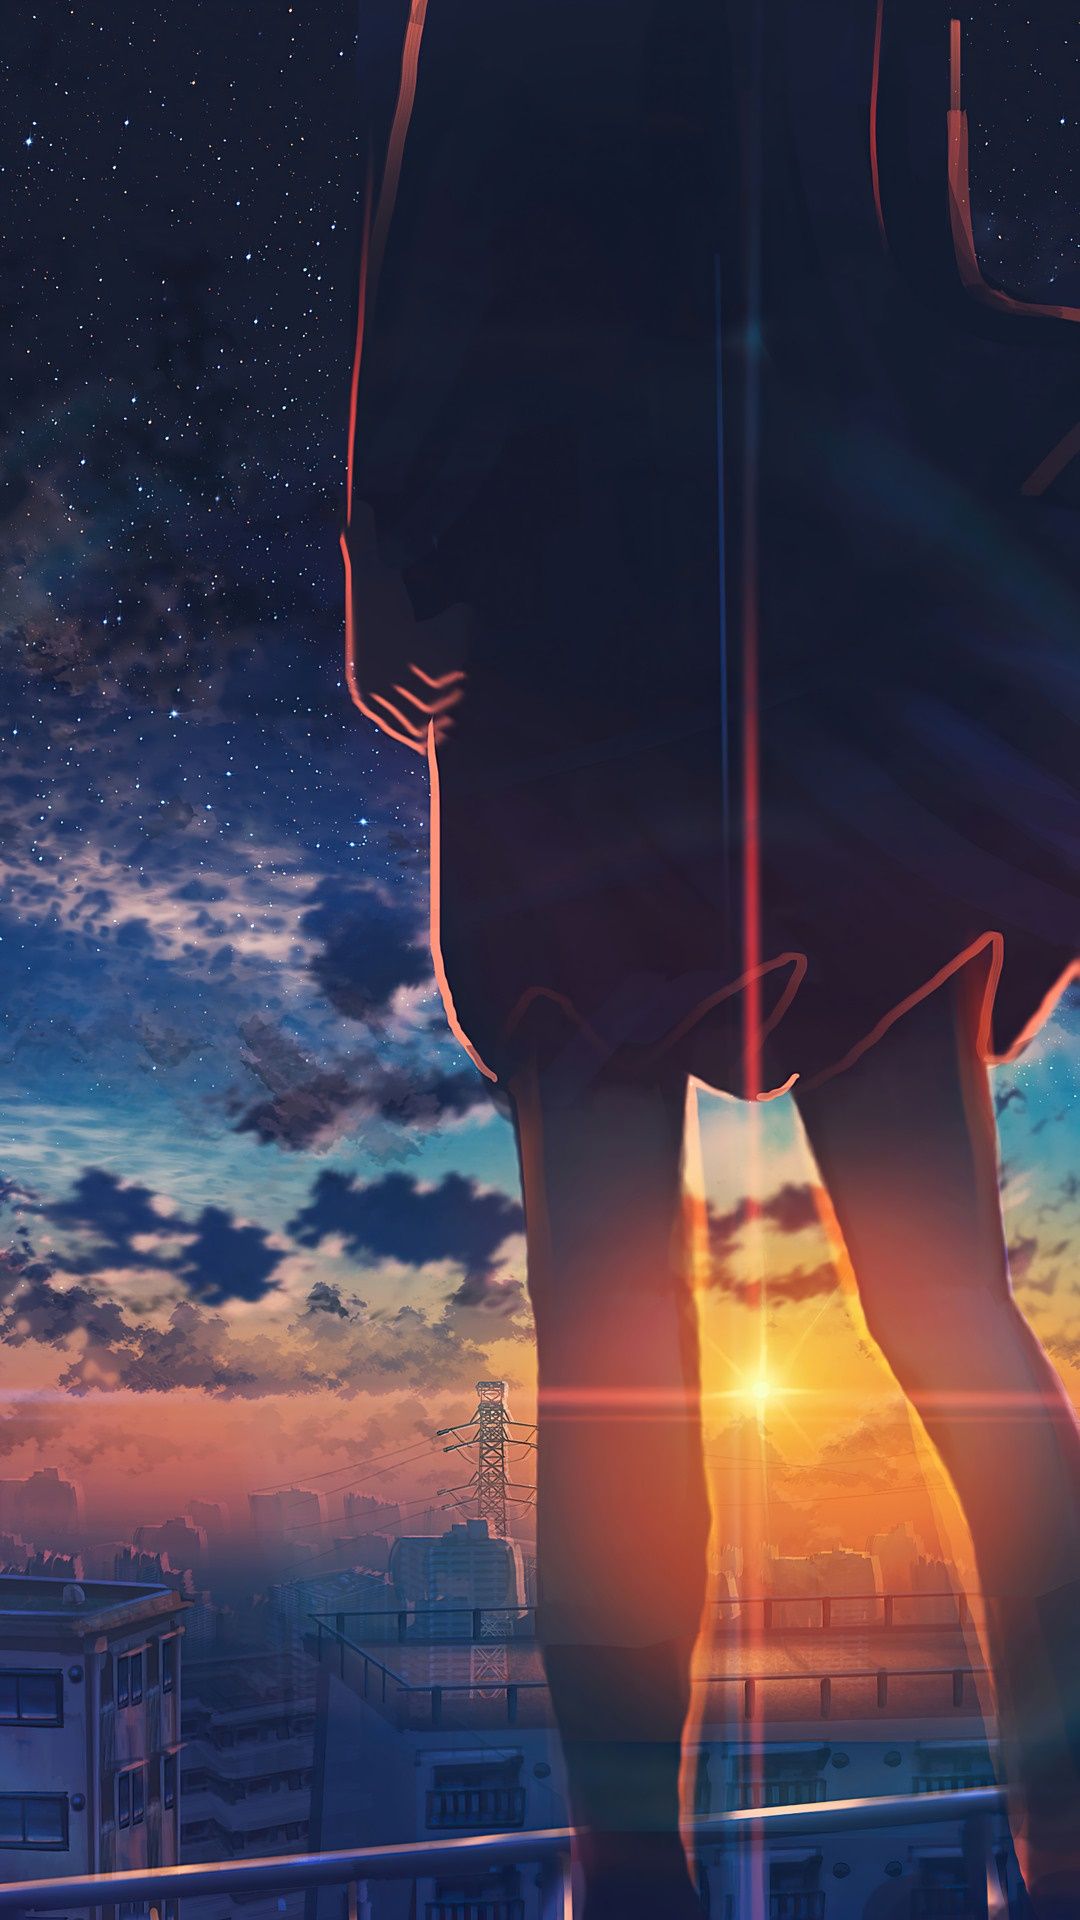 A person standing on the edge of something - Anime sunset